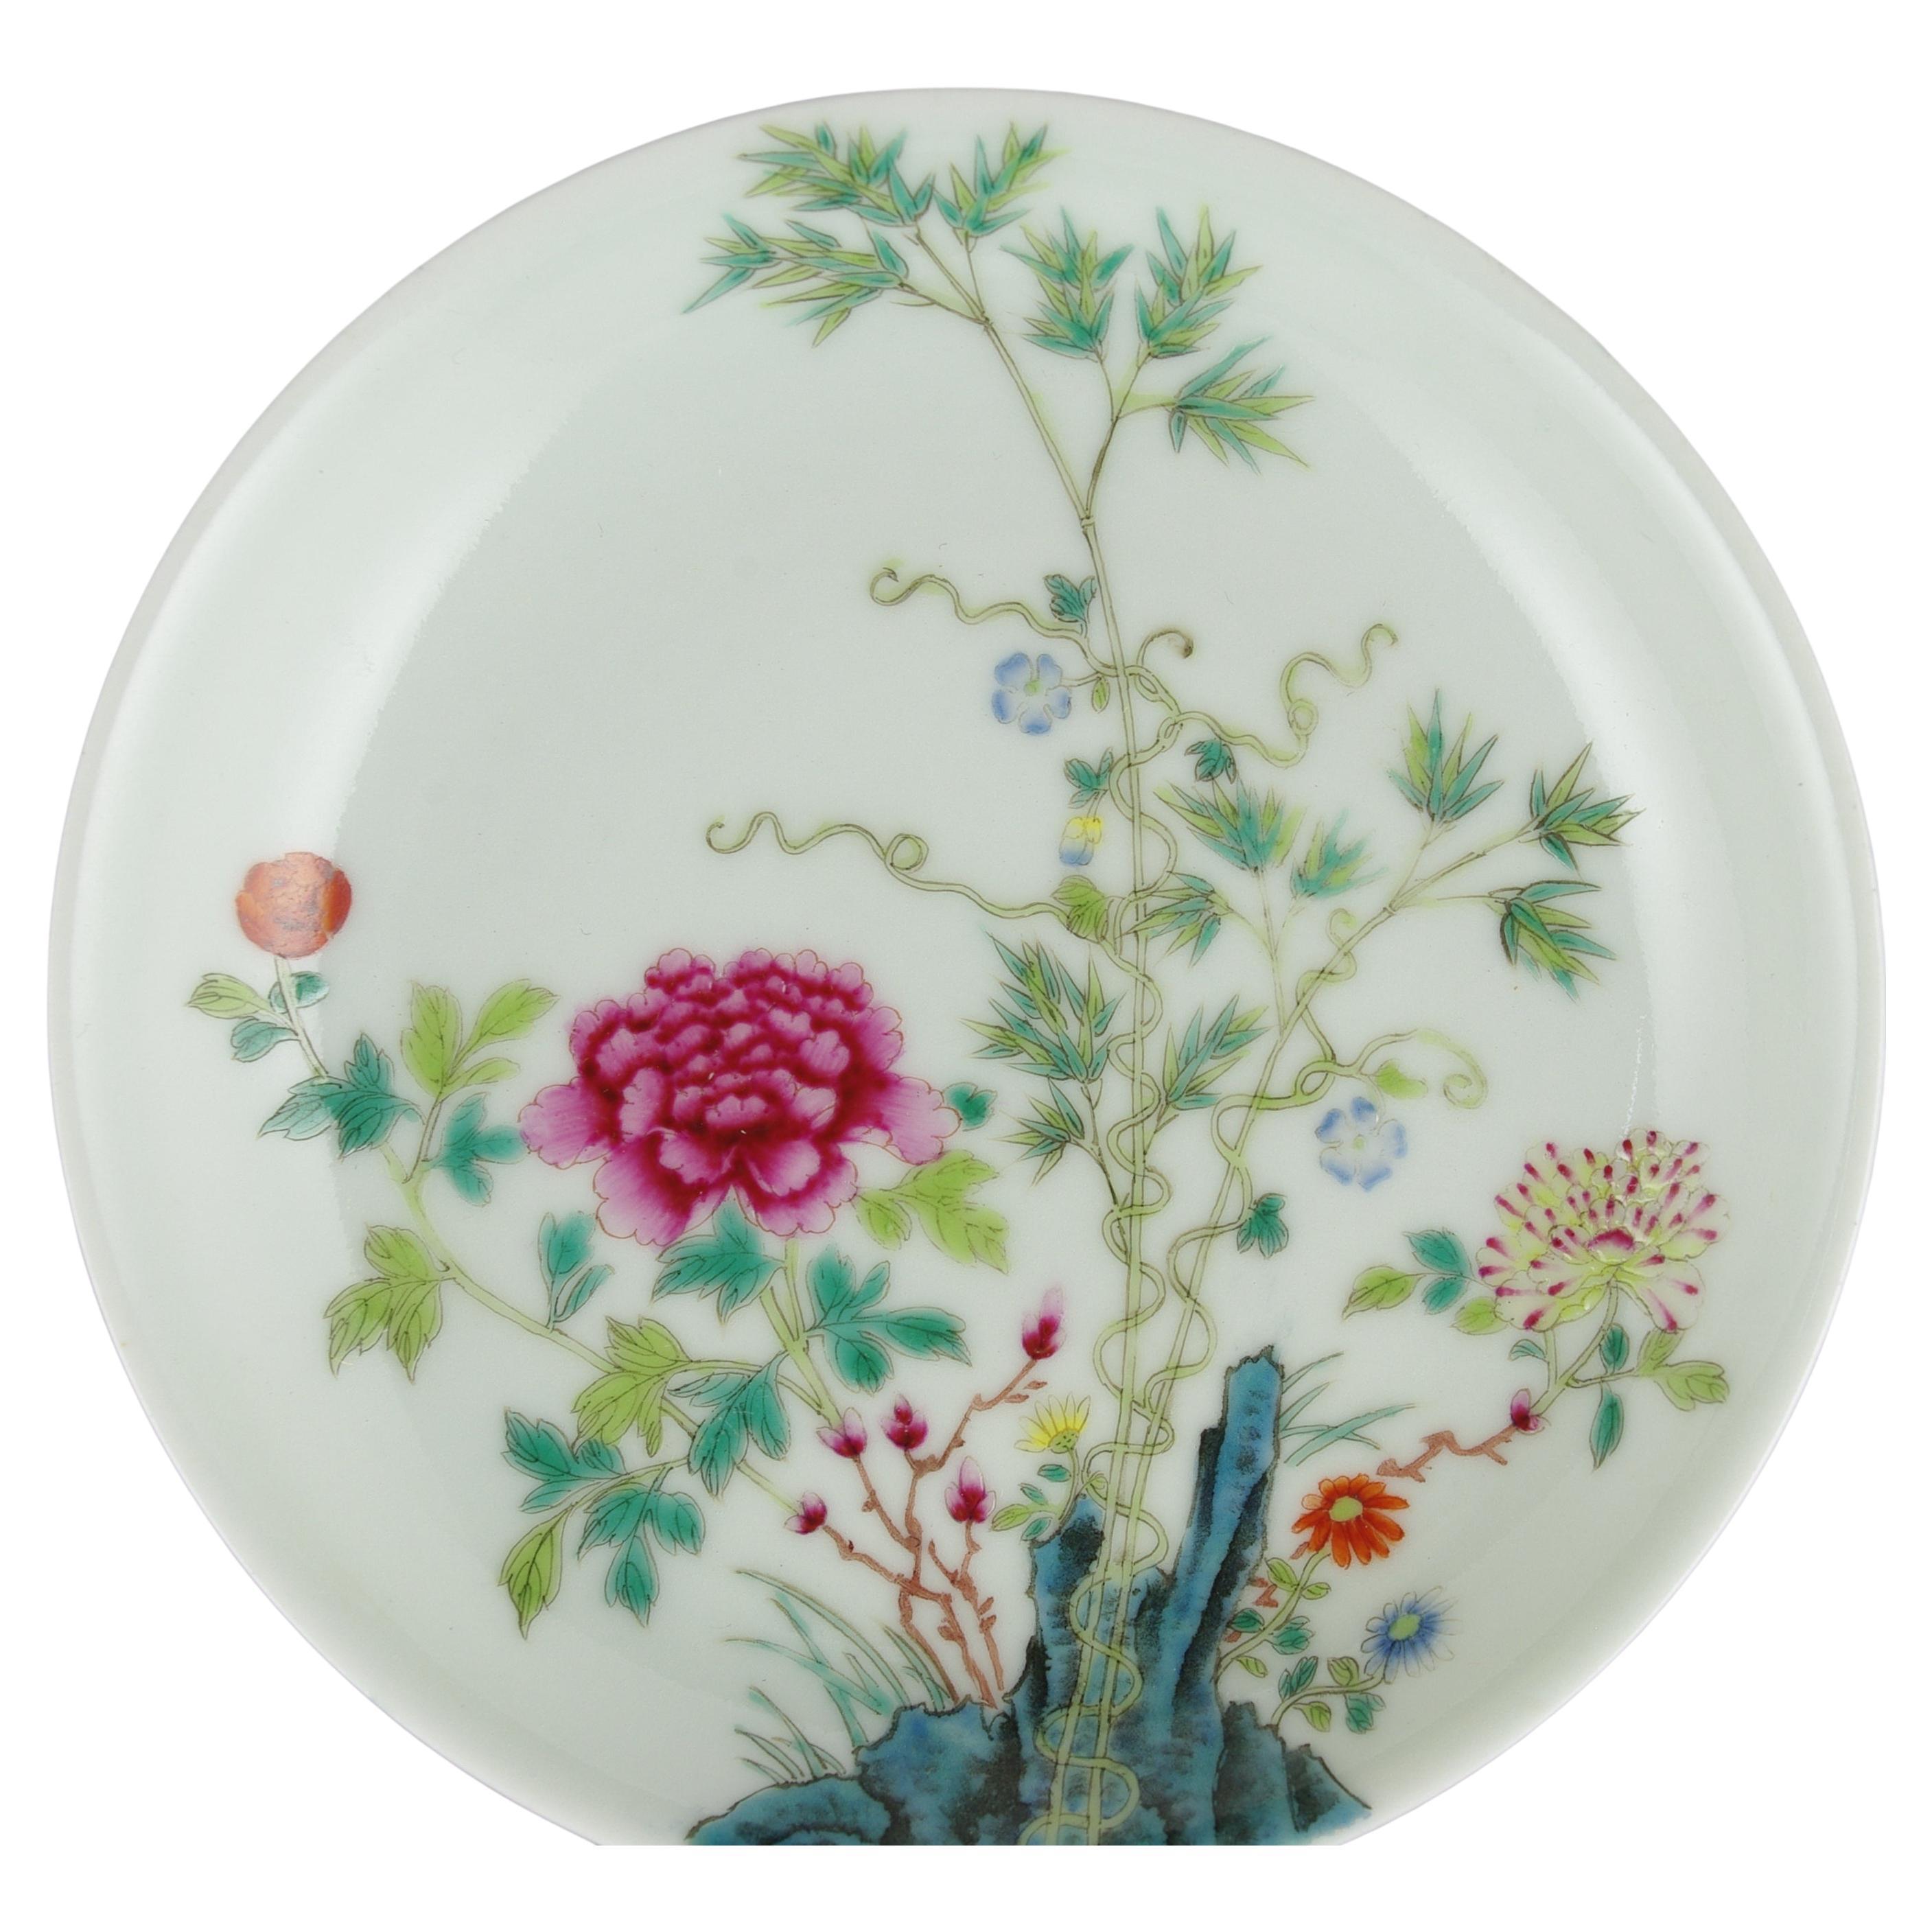 An antique Chinese famille rose fencai porcelain saucer dish, finely painted with a peony blossom in a rocky garden scene with bamboo and a scrolling vine, with six character vertical Guangxu mark to base within the footring in iron red

circa 1890,